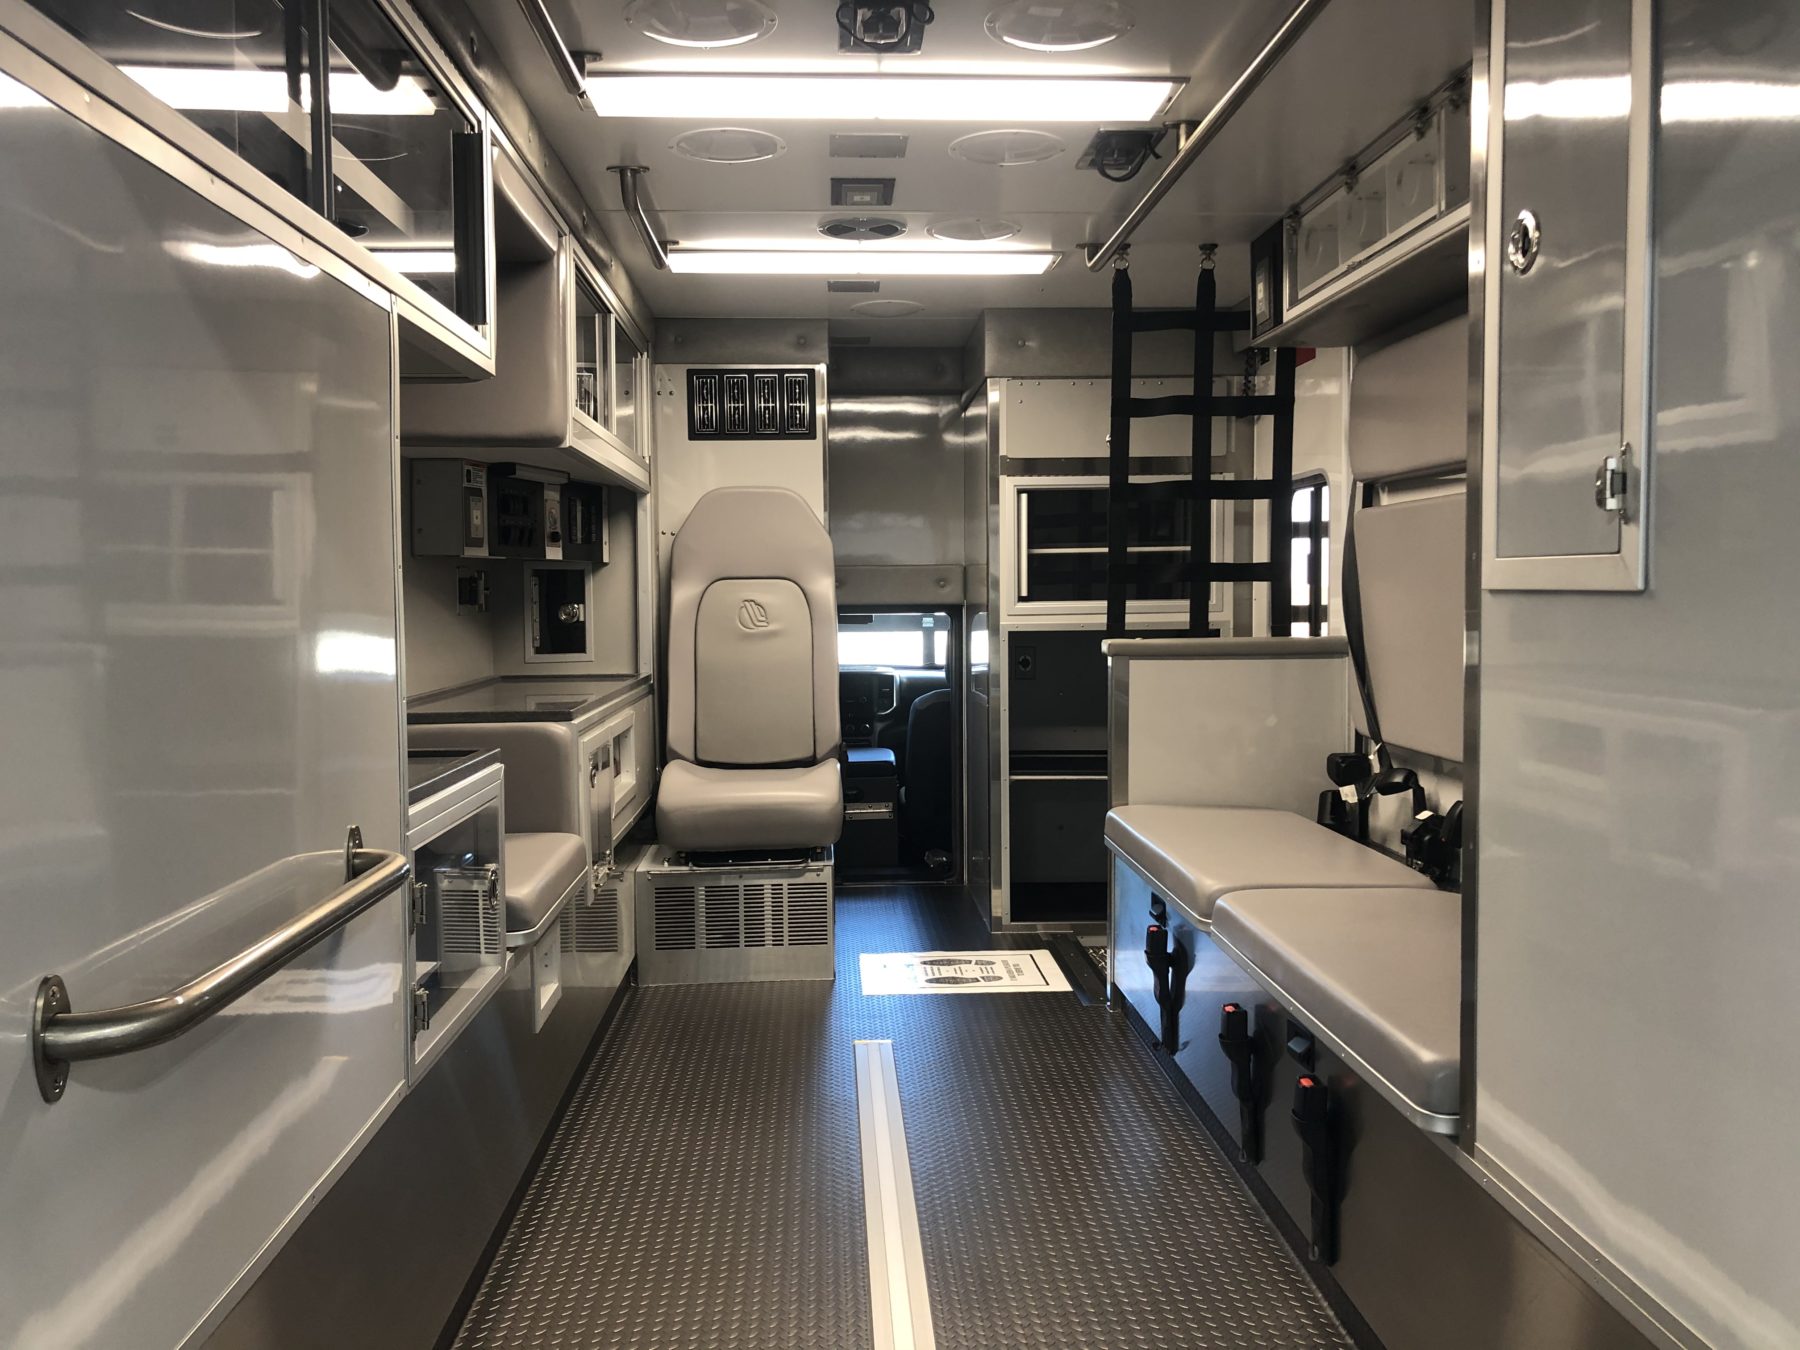 2019 Ram 4500 4x4 Heavy Duty Ambulance For Sale – Picture 2